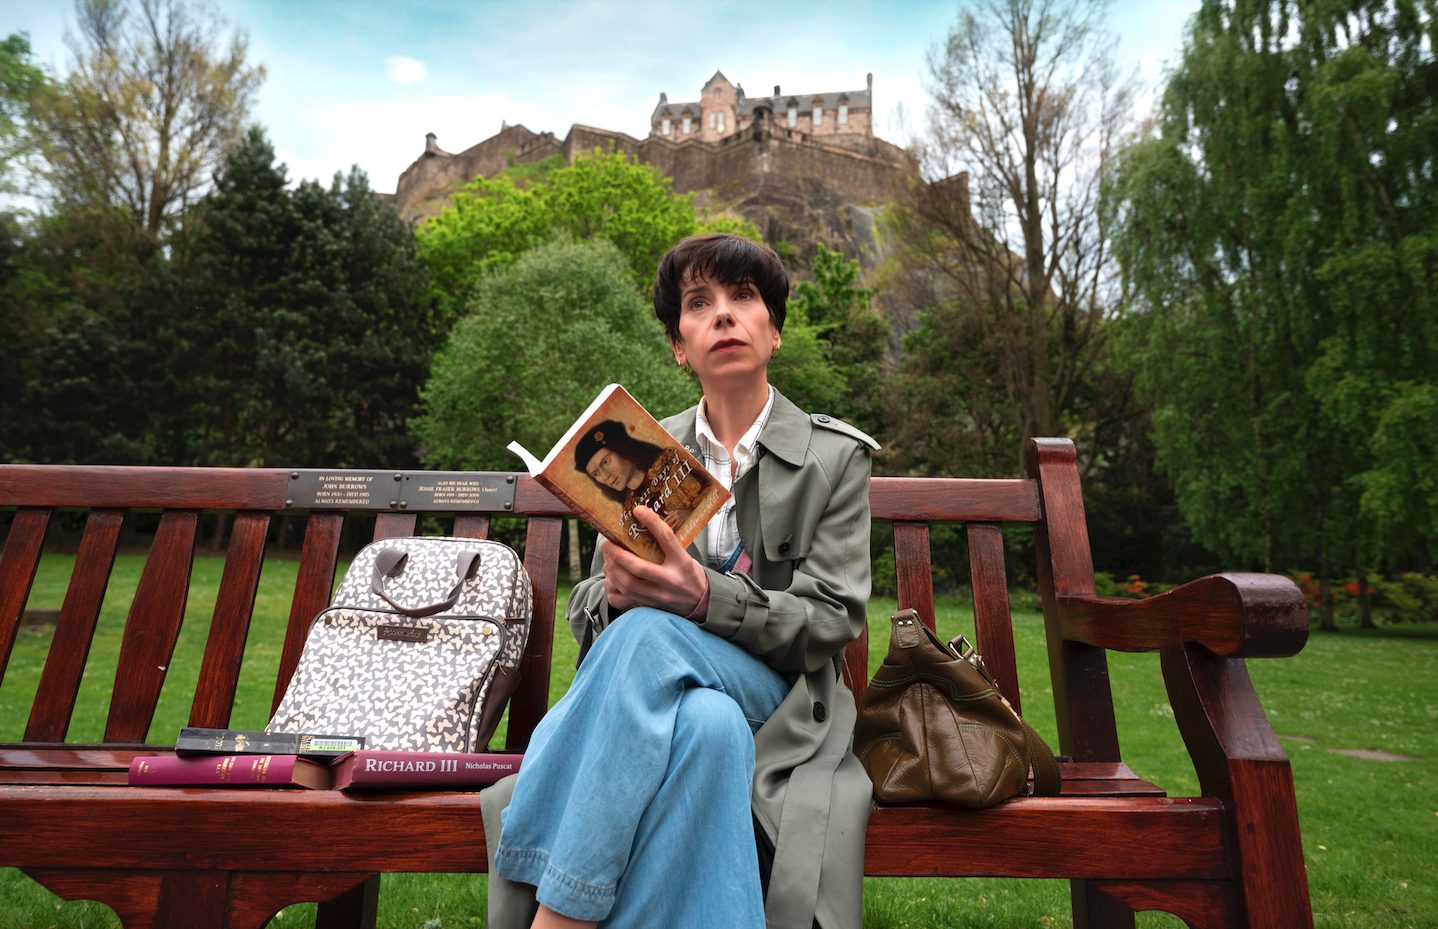 “The Lost King” showcases Sally Hawkins at her best